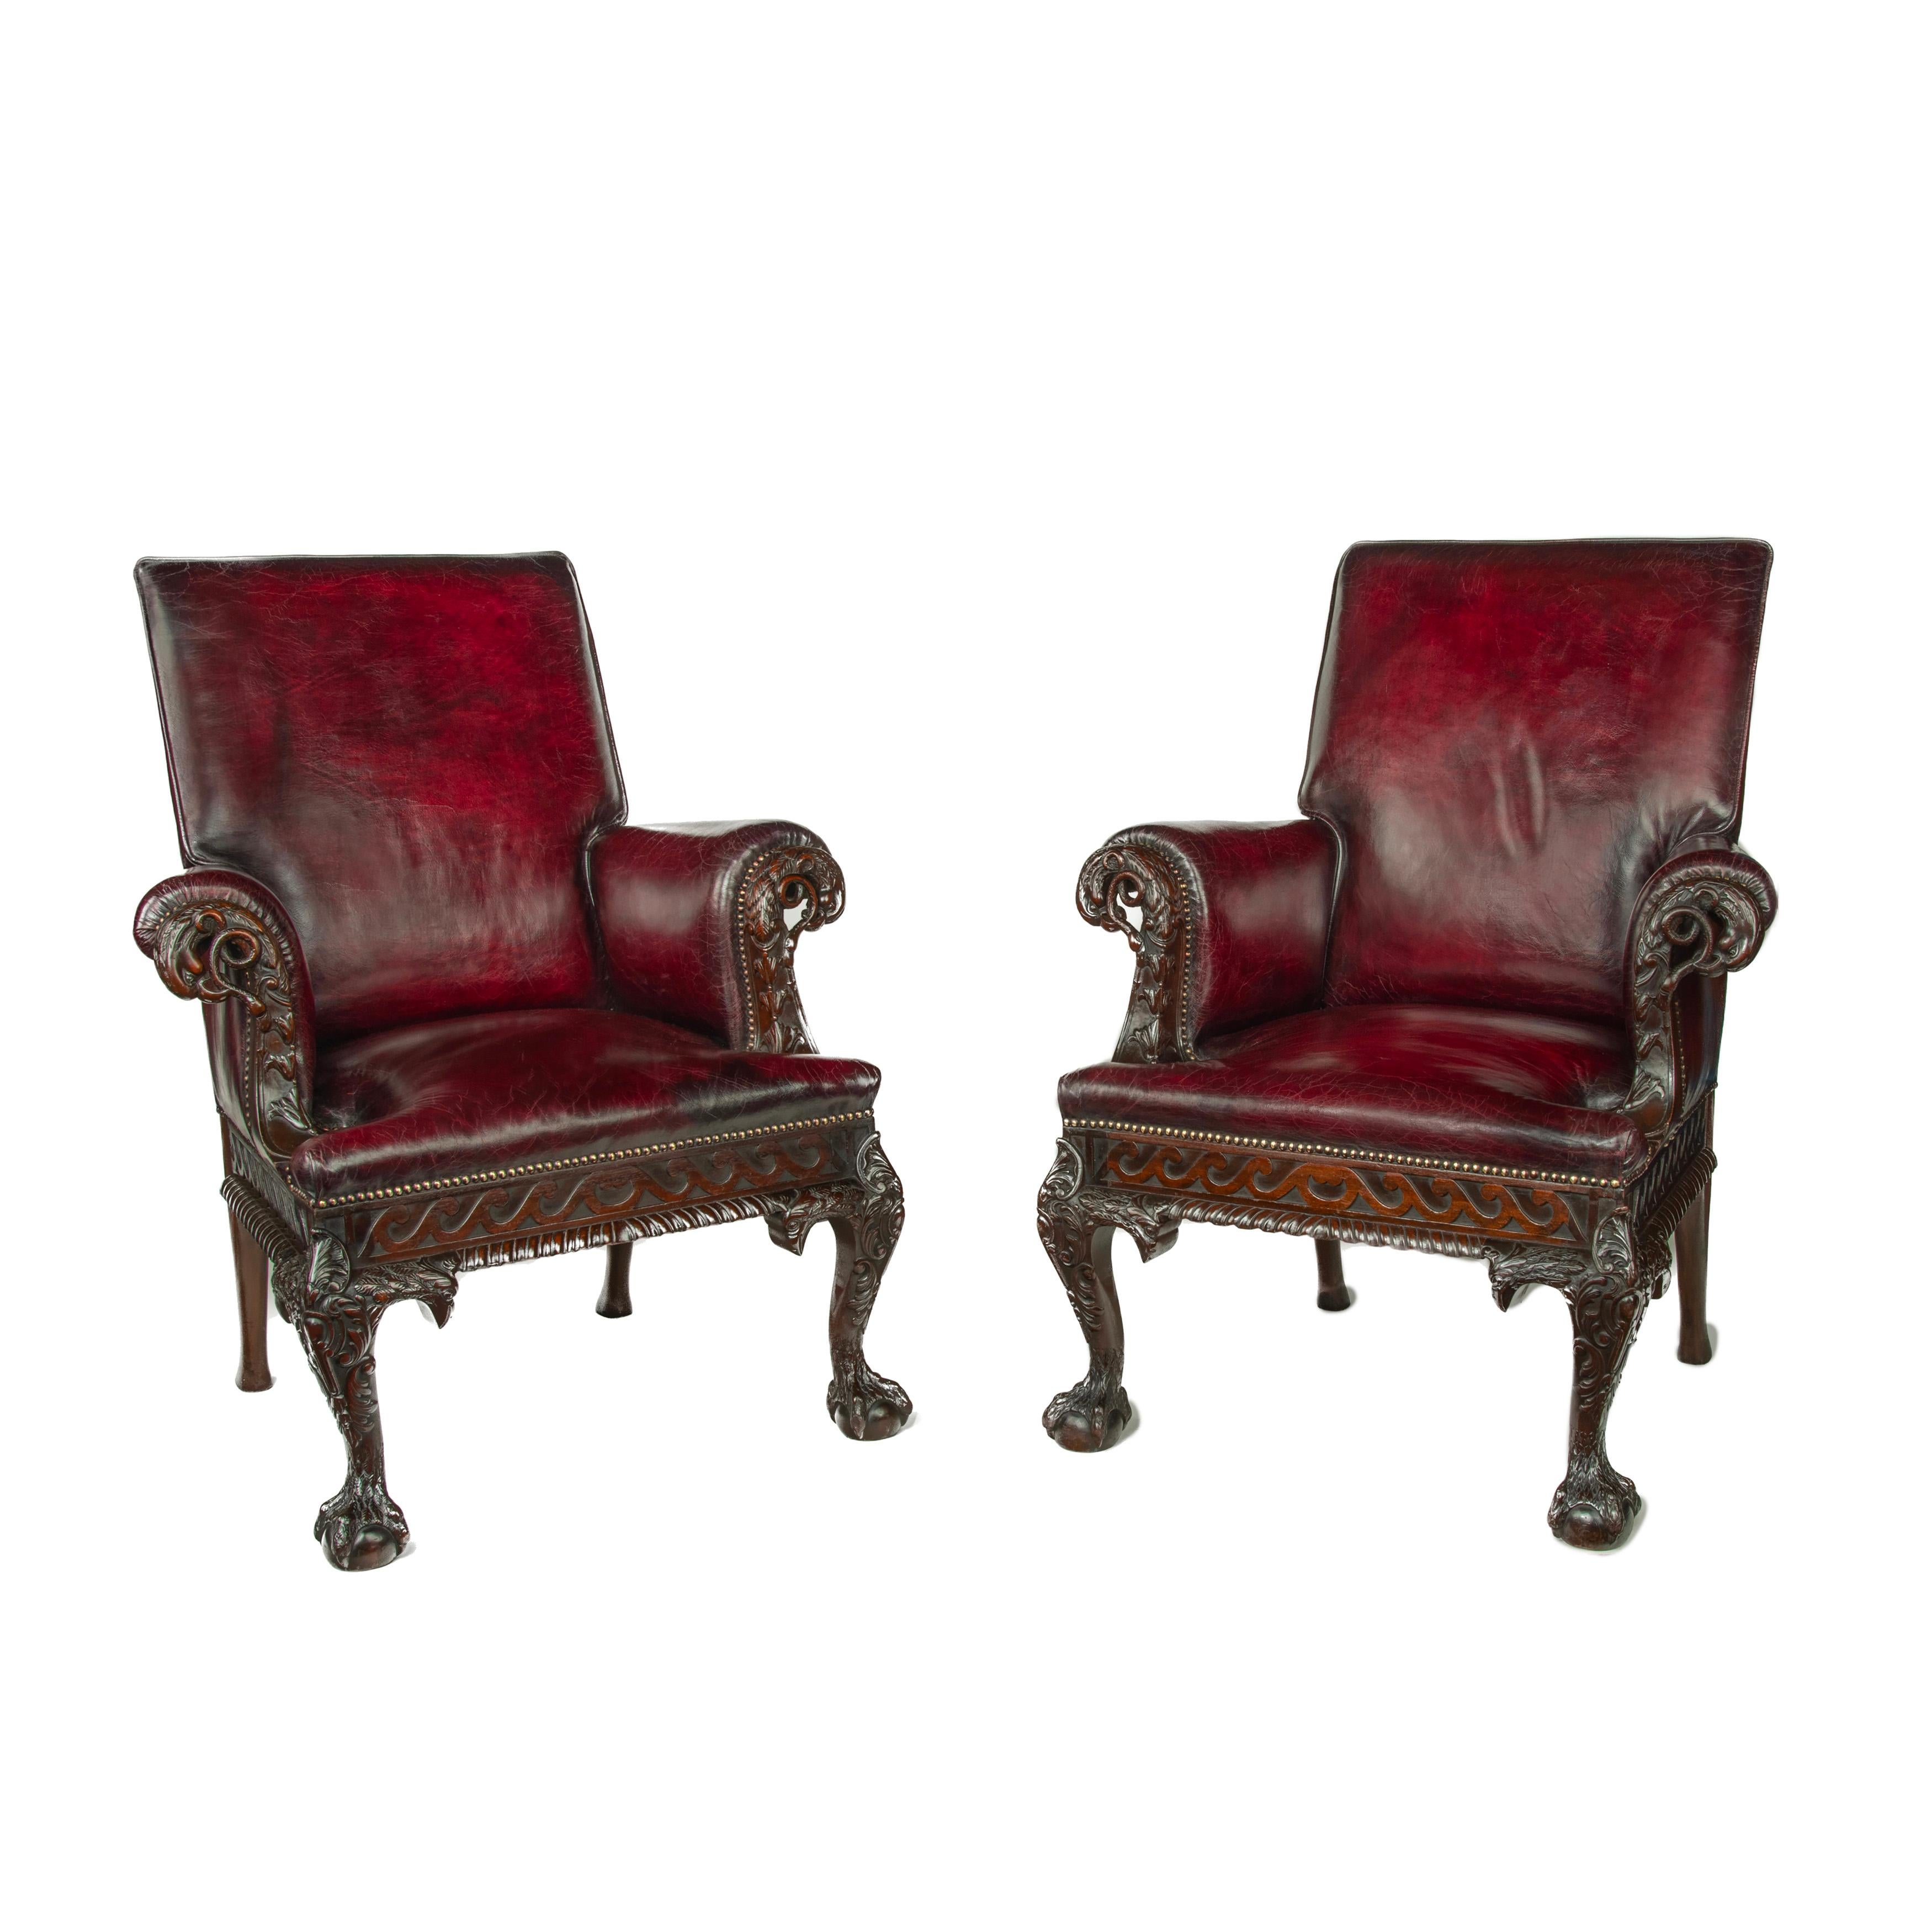 A fine pair of generous late Victorian mahogany eagle armchairs, each with a square back and scrolling armrests, the face of each arm boldly carved with an openwork eagle holding a writhing snake in its beak, above graduated flowerheads, the chair